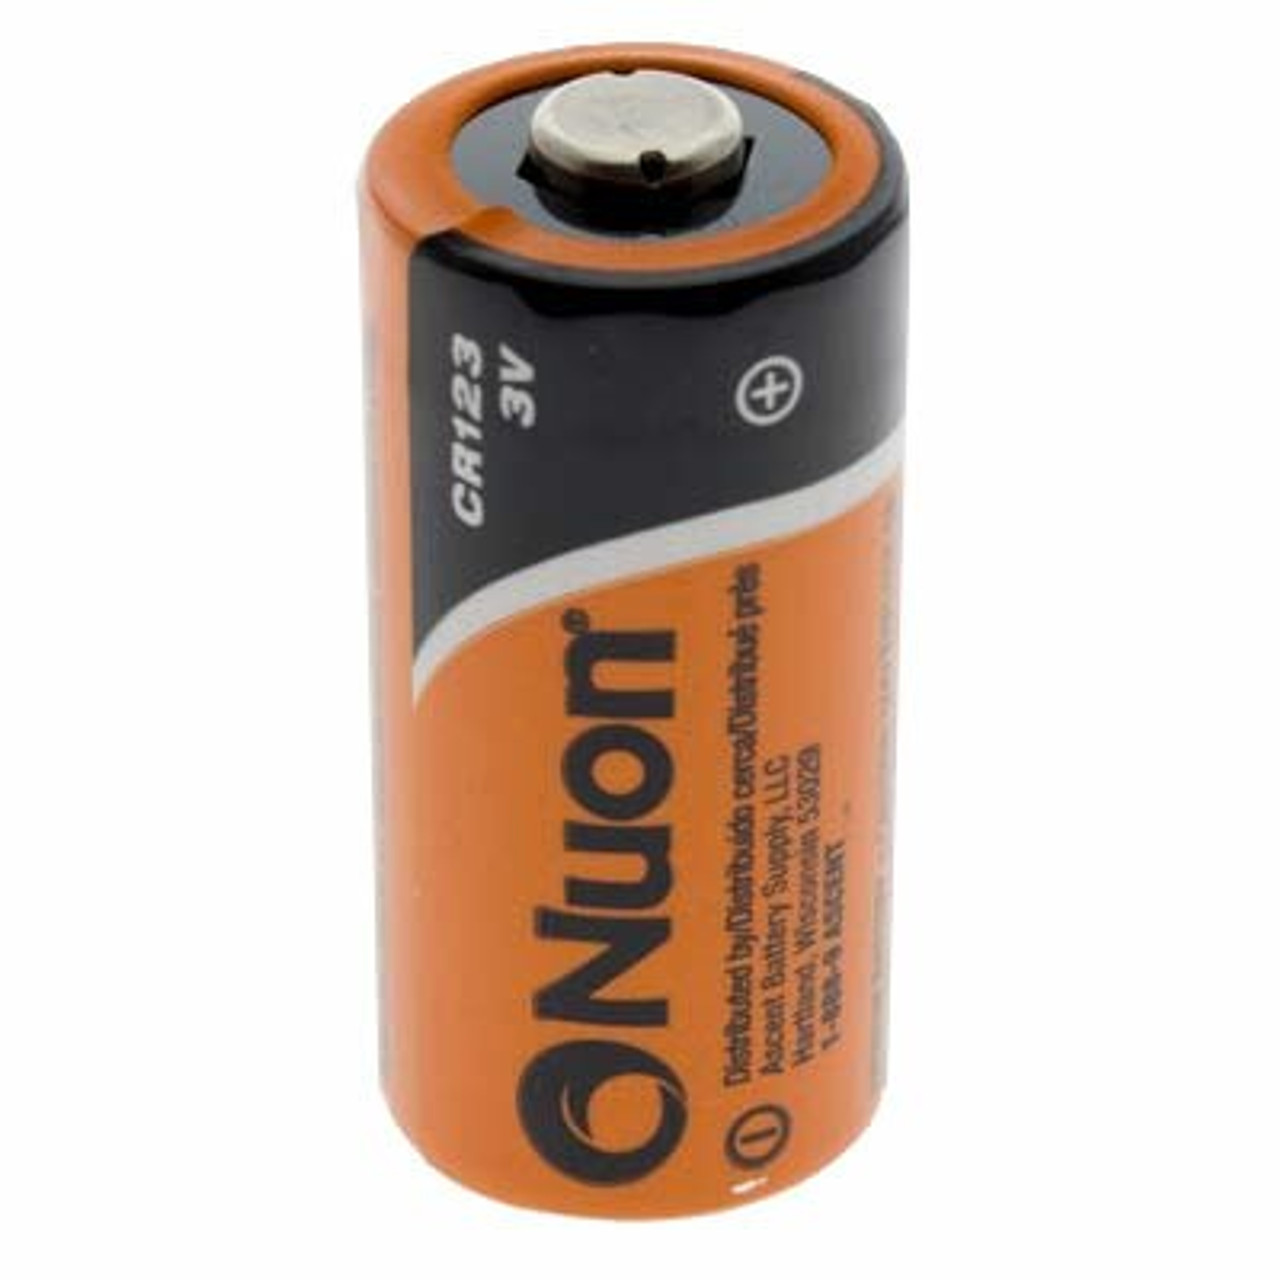 Nuon CR123 Lithium Battery